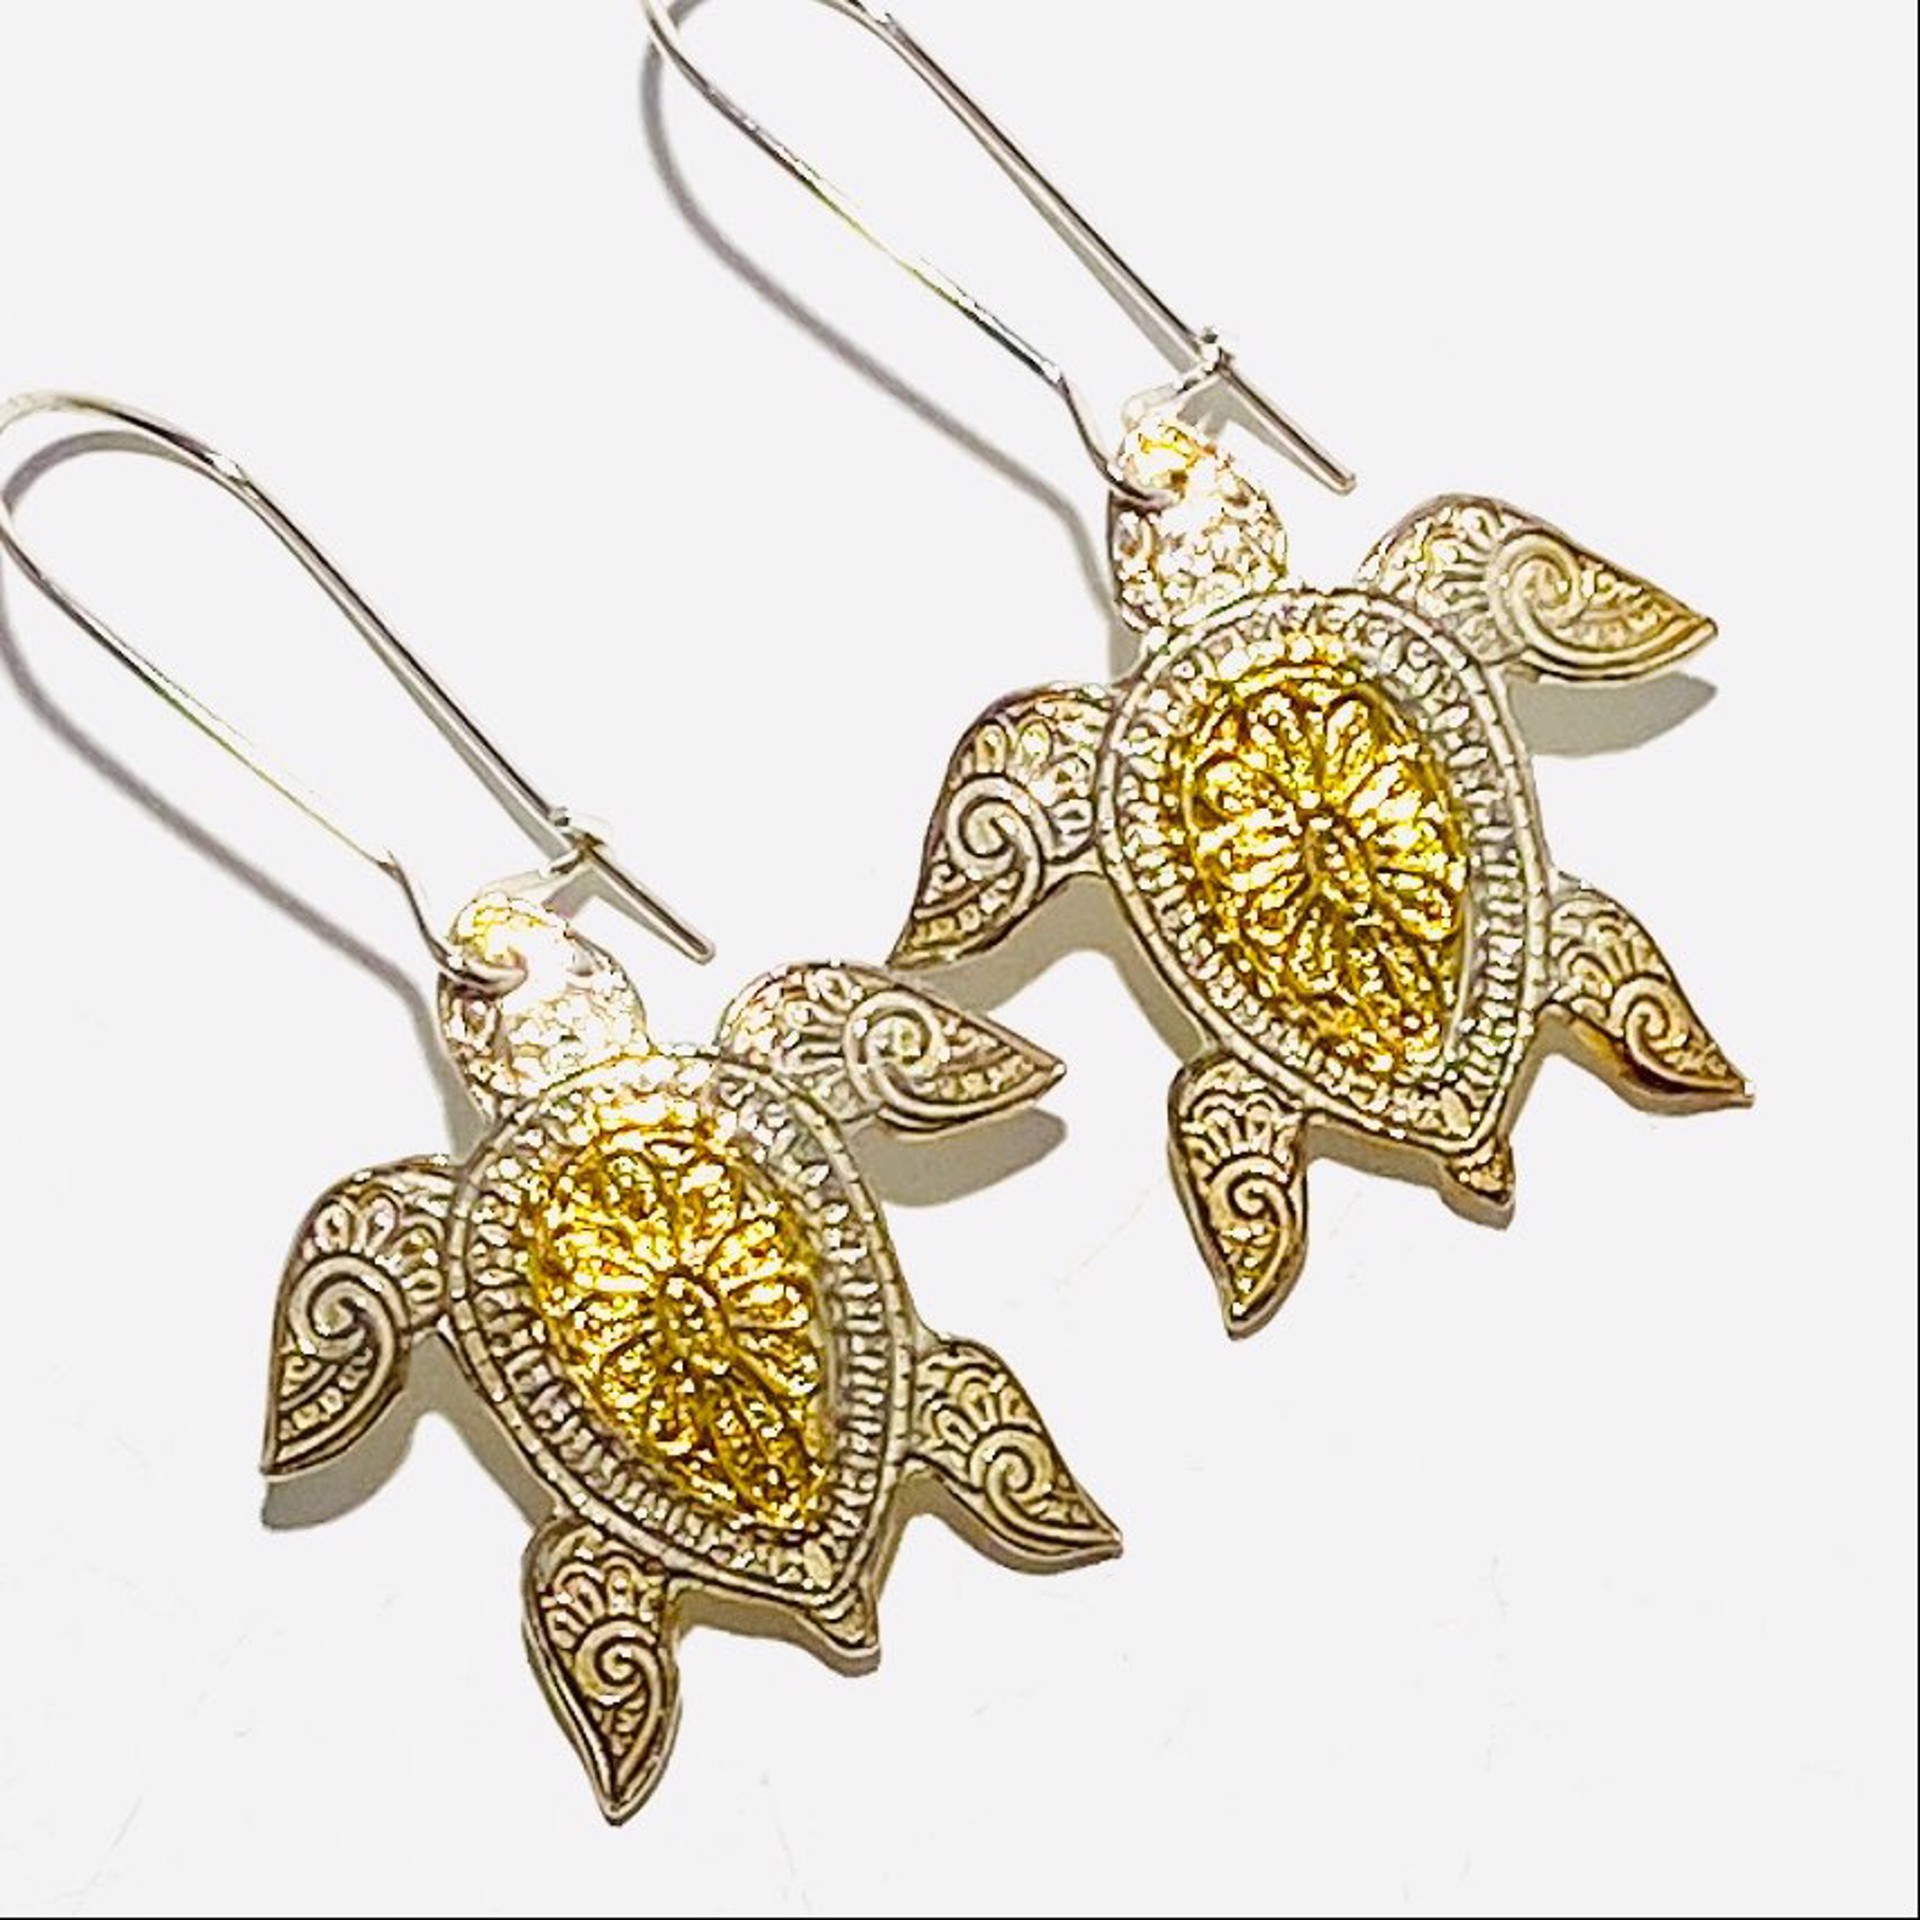 Keum-boo Fine Silver and Gold Turtle Earrings KH23-1 by Karen Hakim